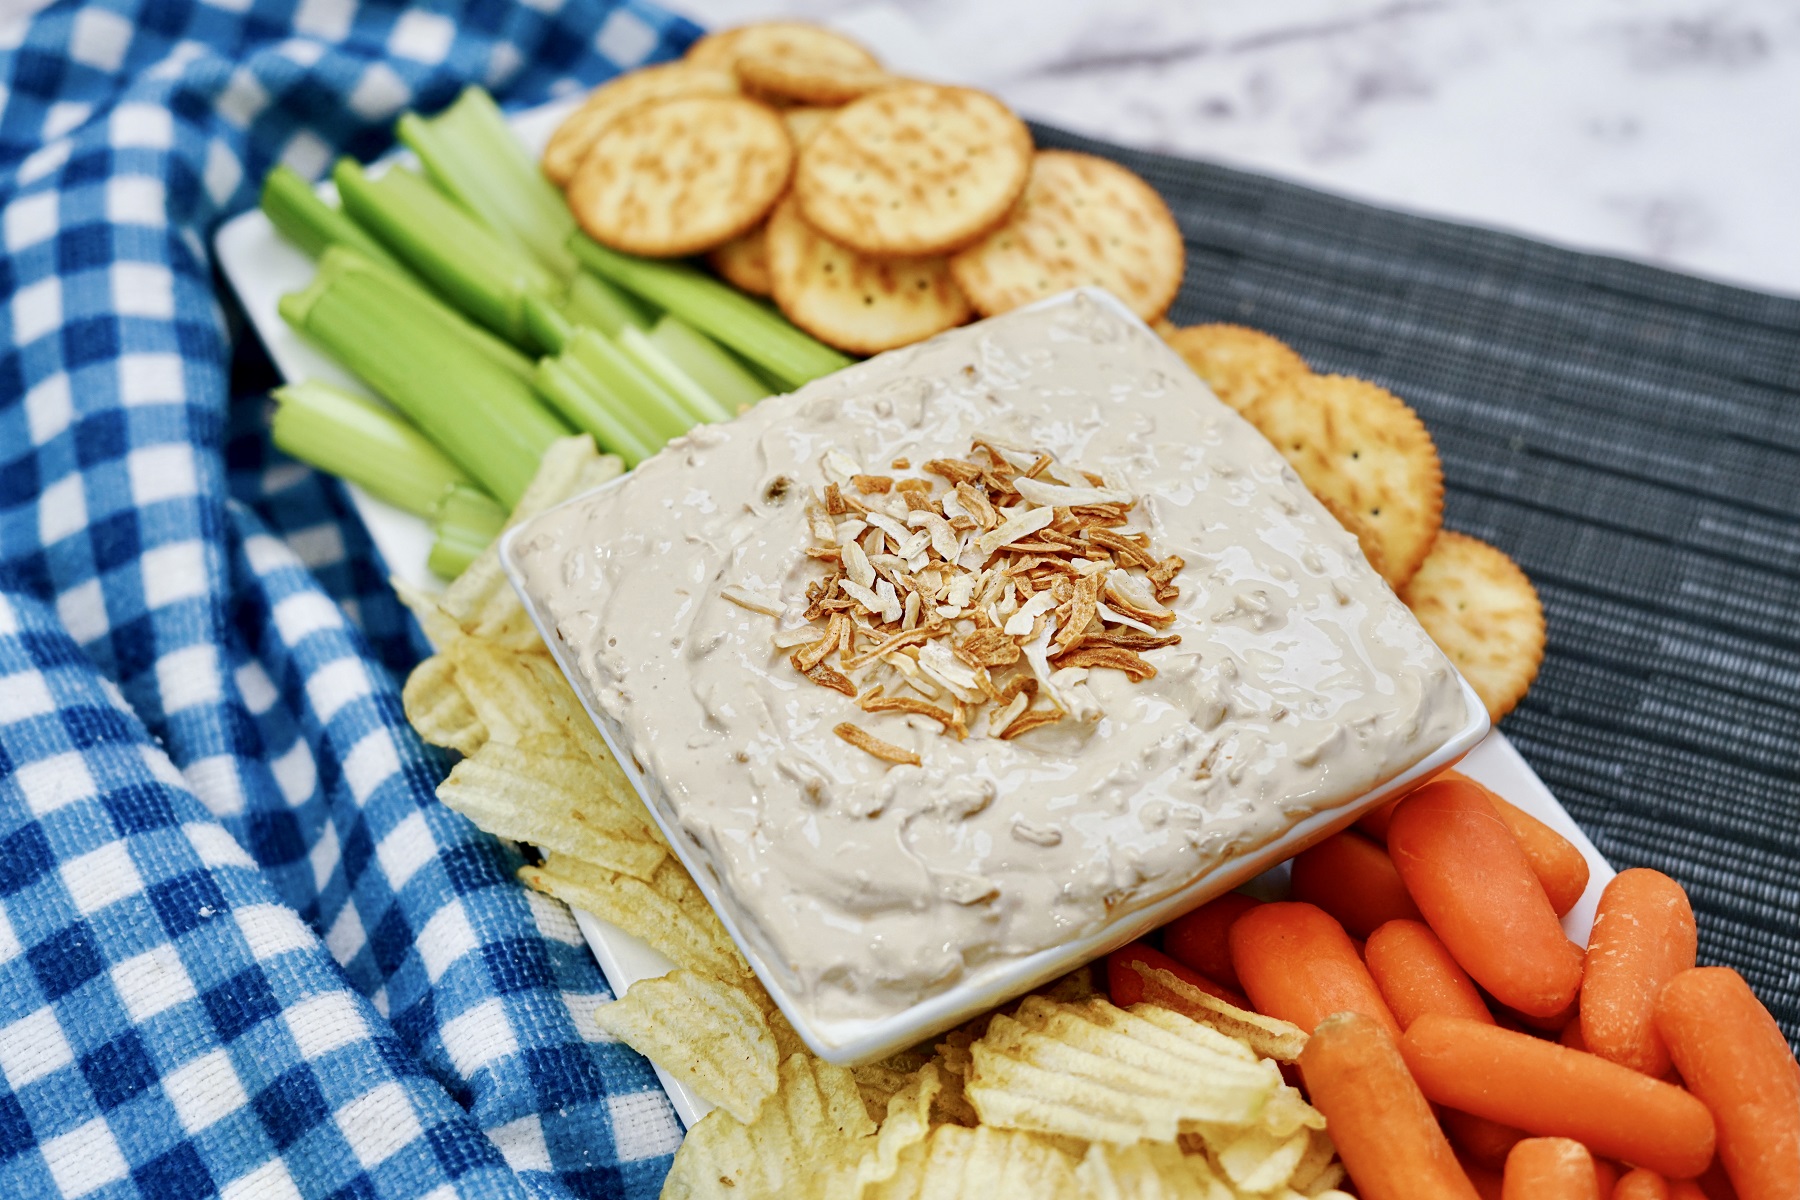 french onion dip in a bowl surroudning by crackers, chips, and veggies